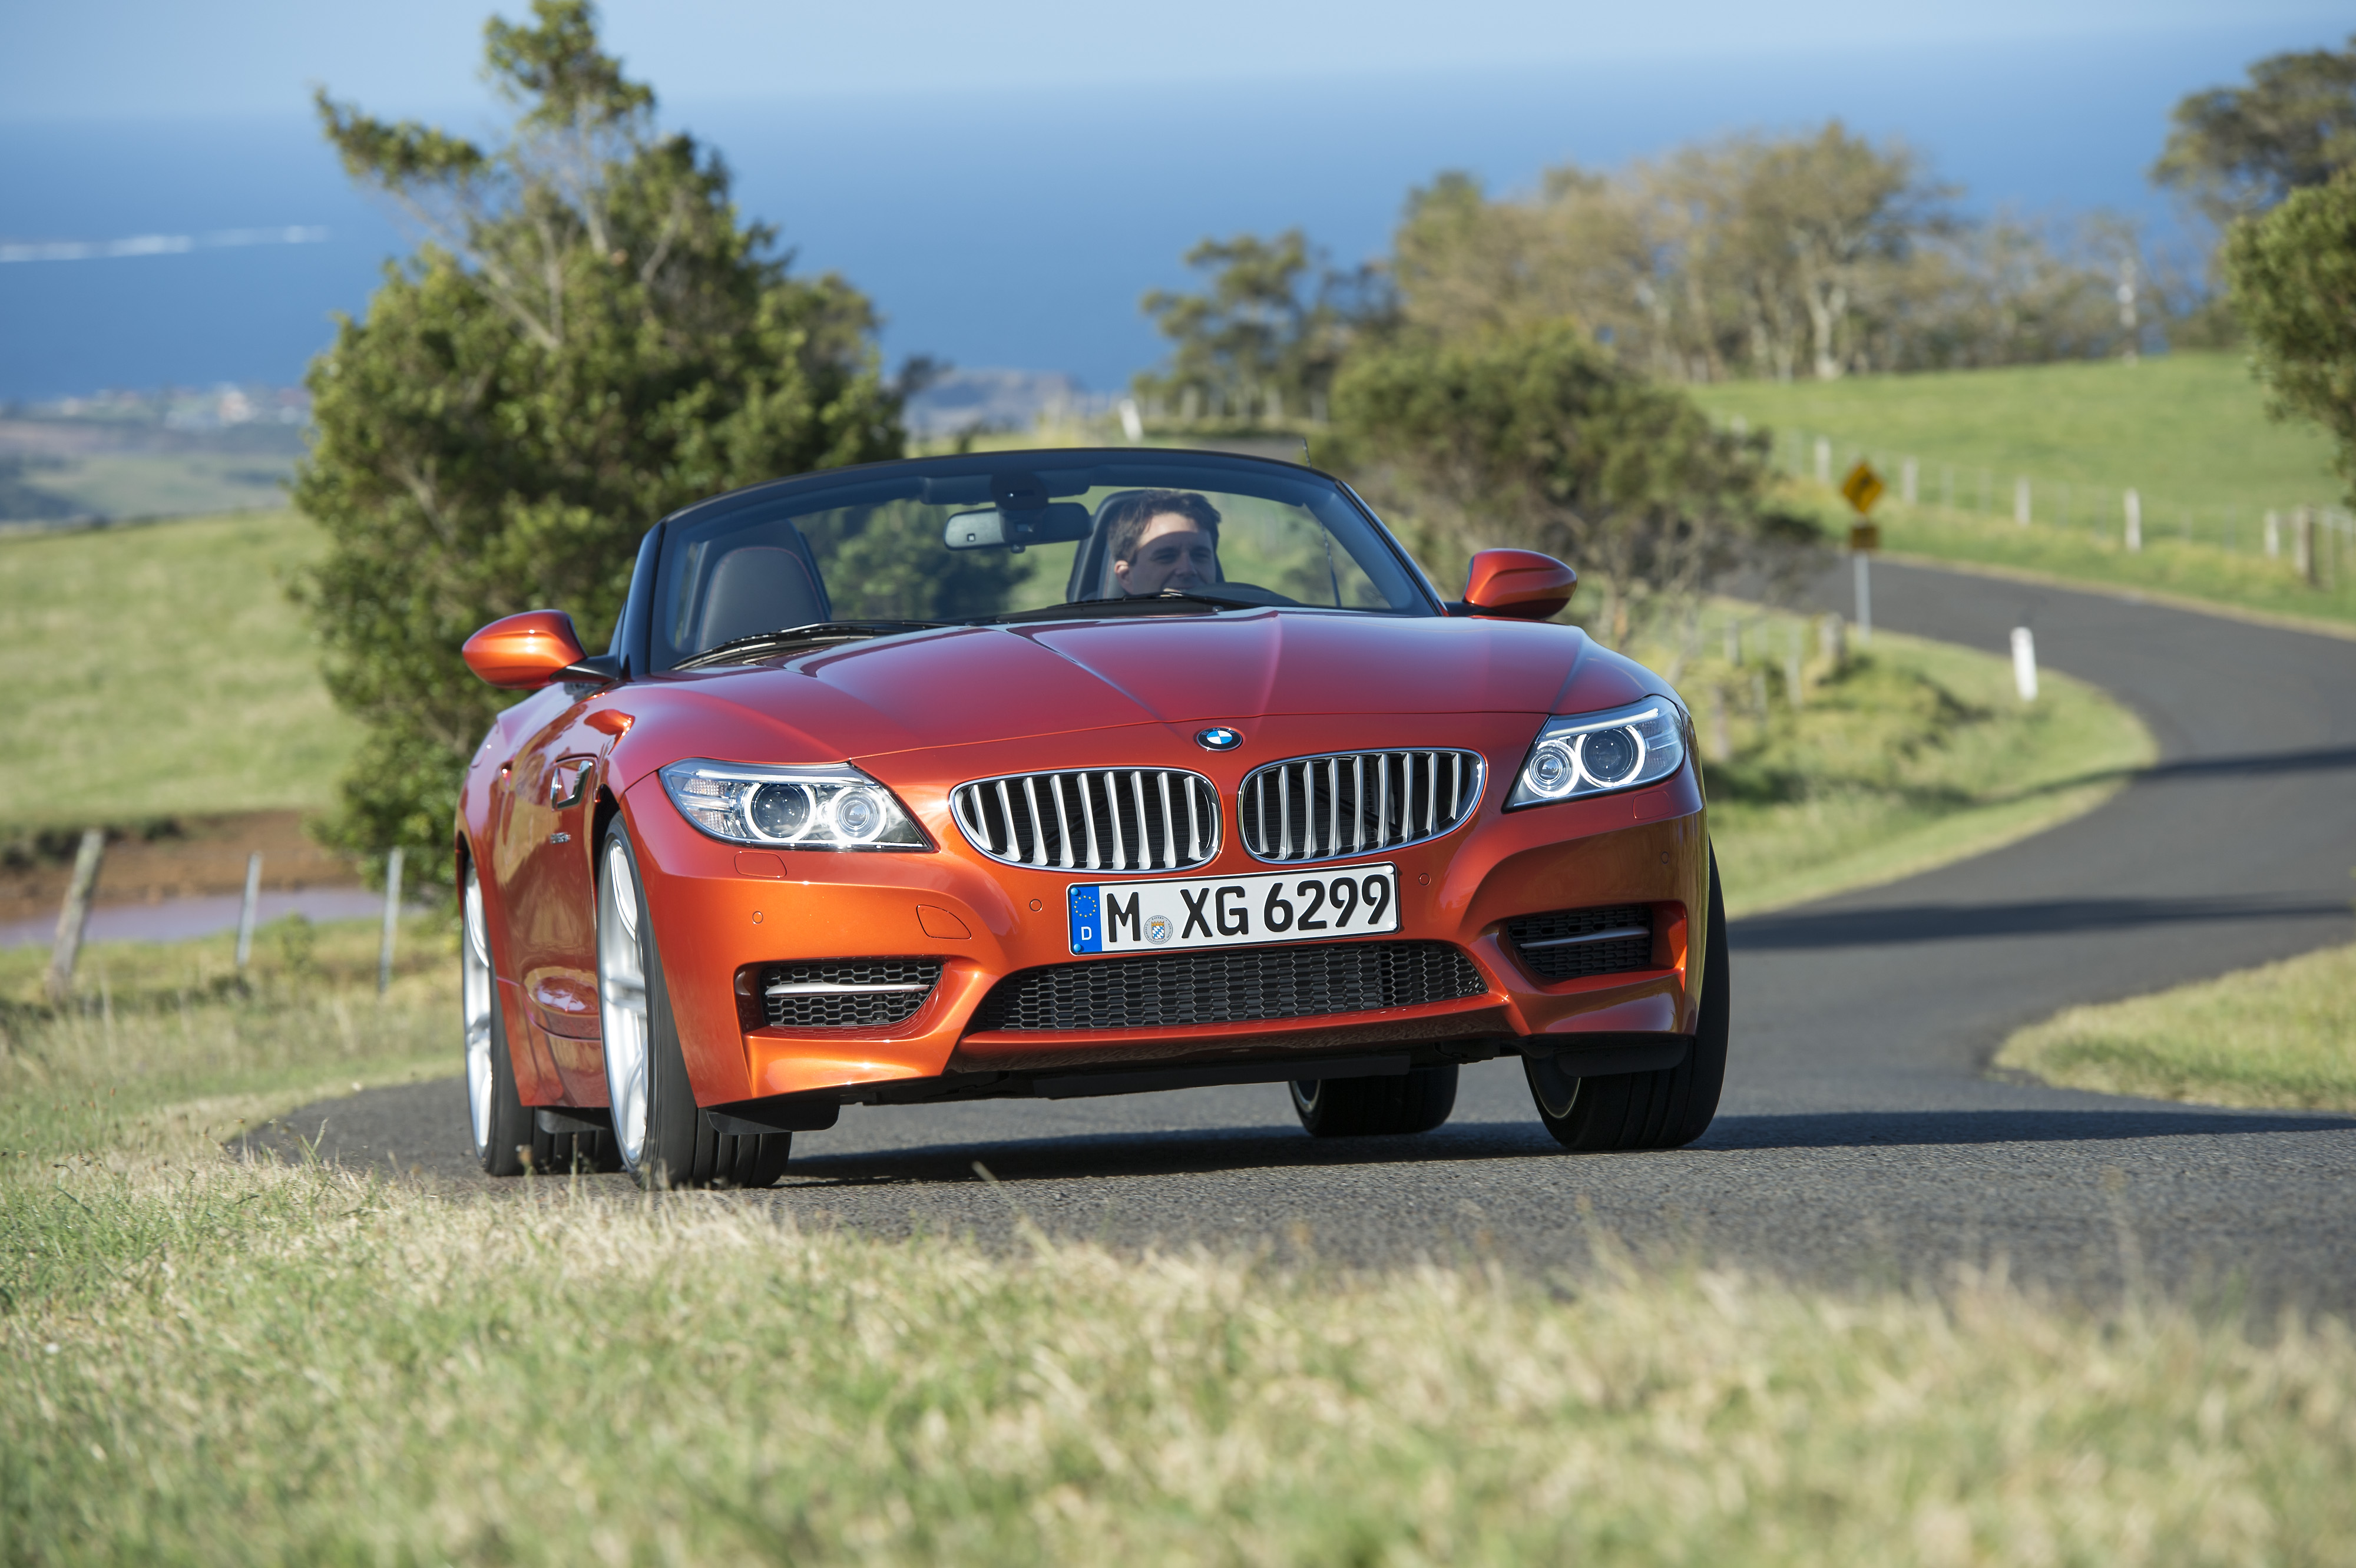 A roadster with character and sporting flair: The new BMW Z4.